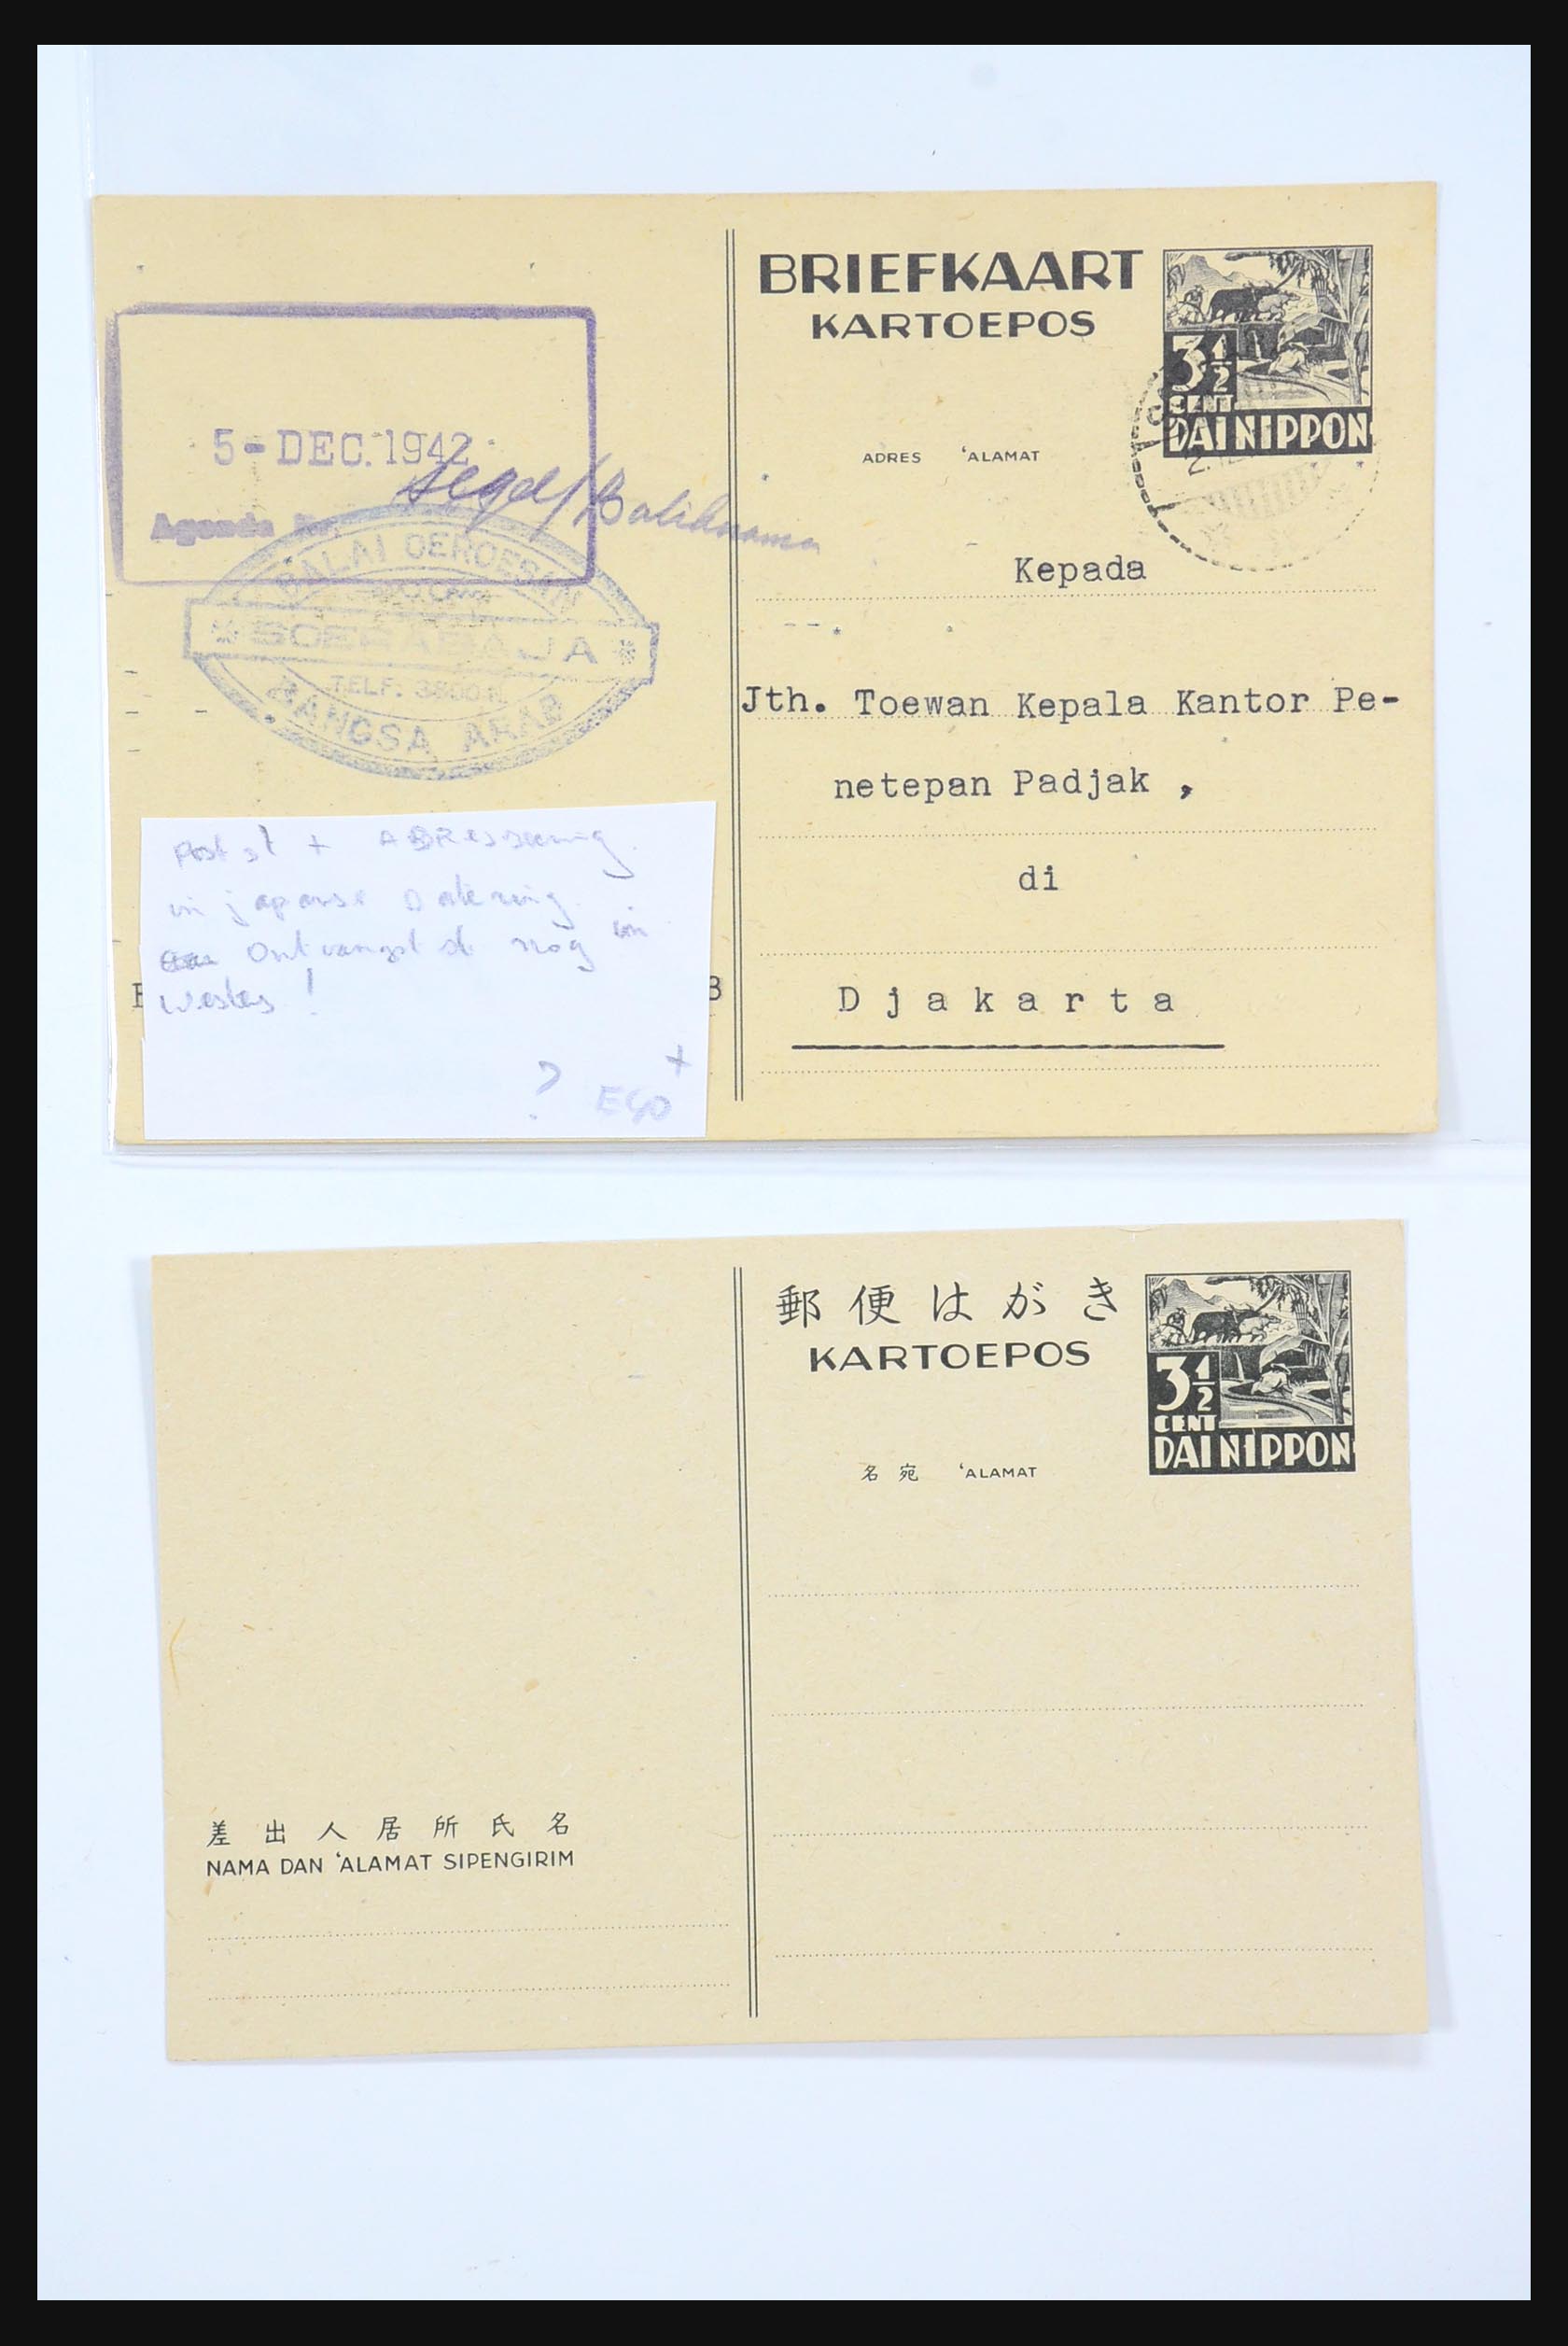 31362 001 - 31362 Netherlands Indies Japanese occupation covers 1942-1945.